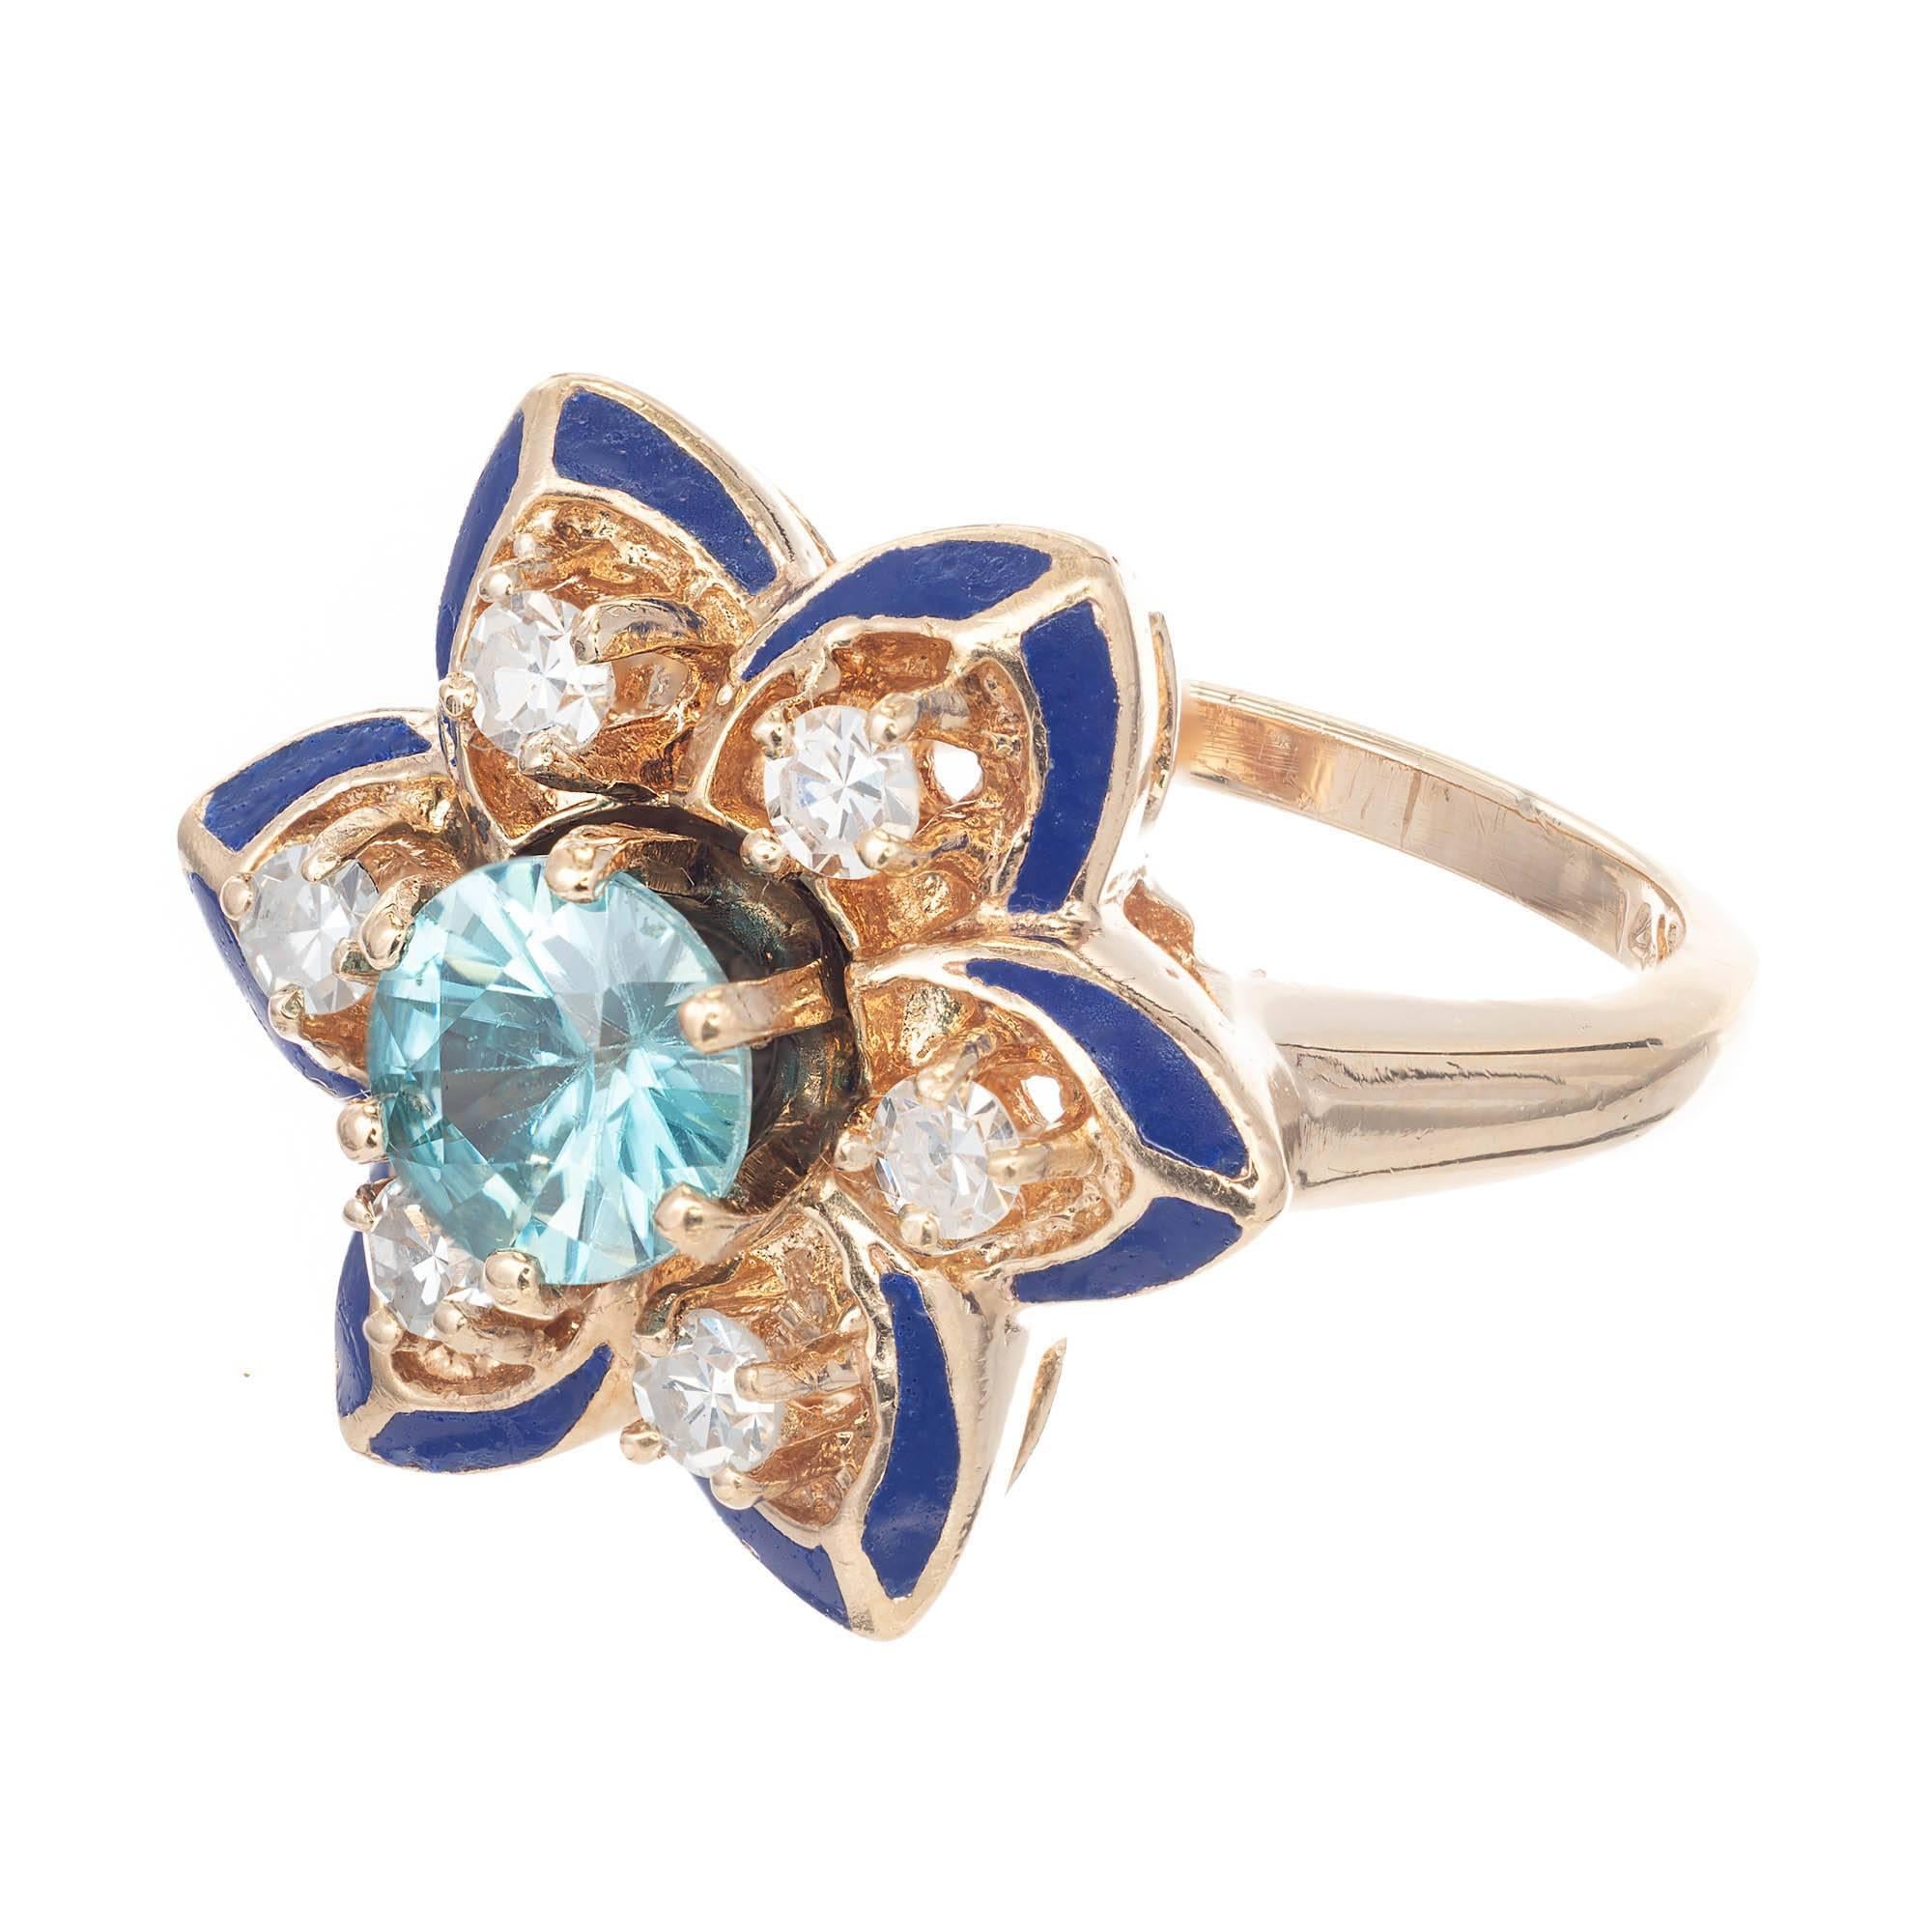 1950s Blue Zircon Diamond Black Enamel Yellow Gold Flower Cocktail Ring. Flower design setting with black enamel, diamonds and a round cneter  blue Zircon.

One 5.8mm genuine blue Zircon, approx. total weight .95cts, VS
6 full cut diamonds, approx.